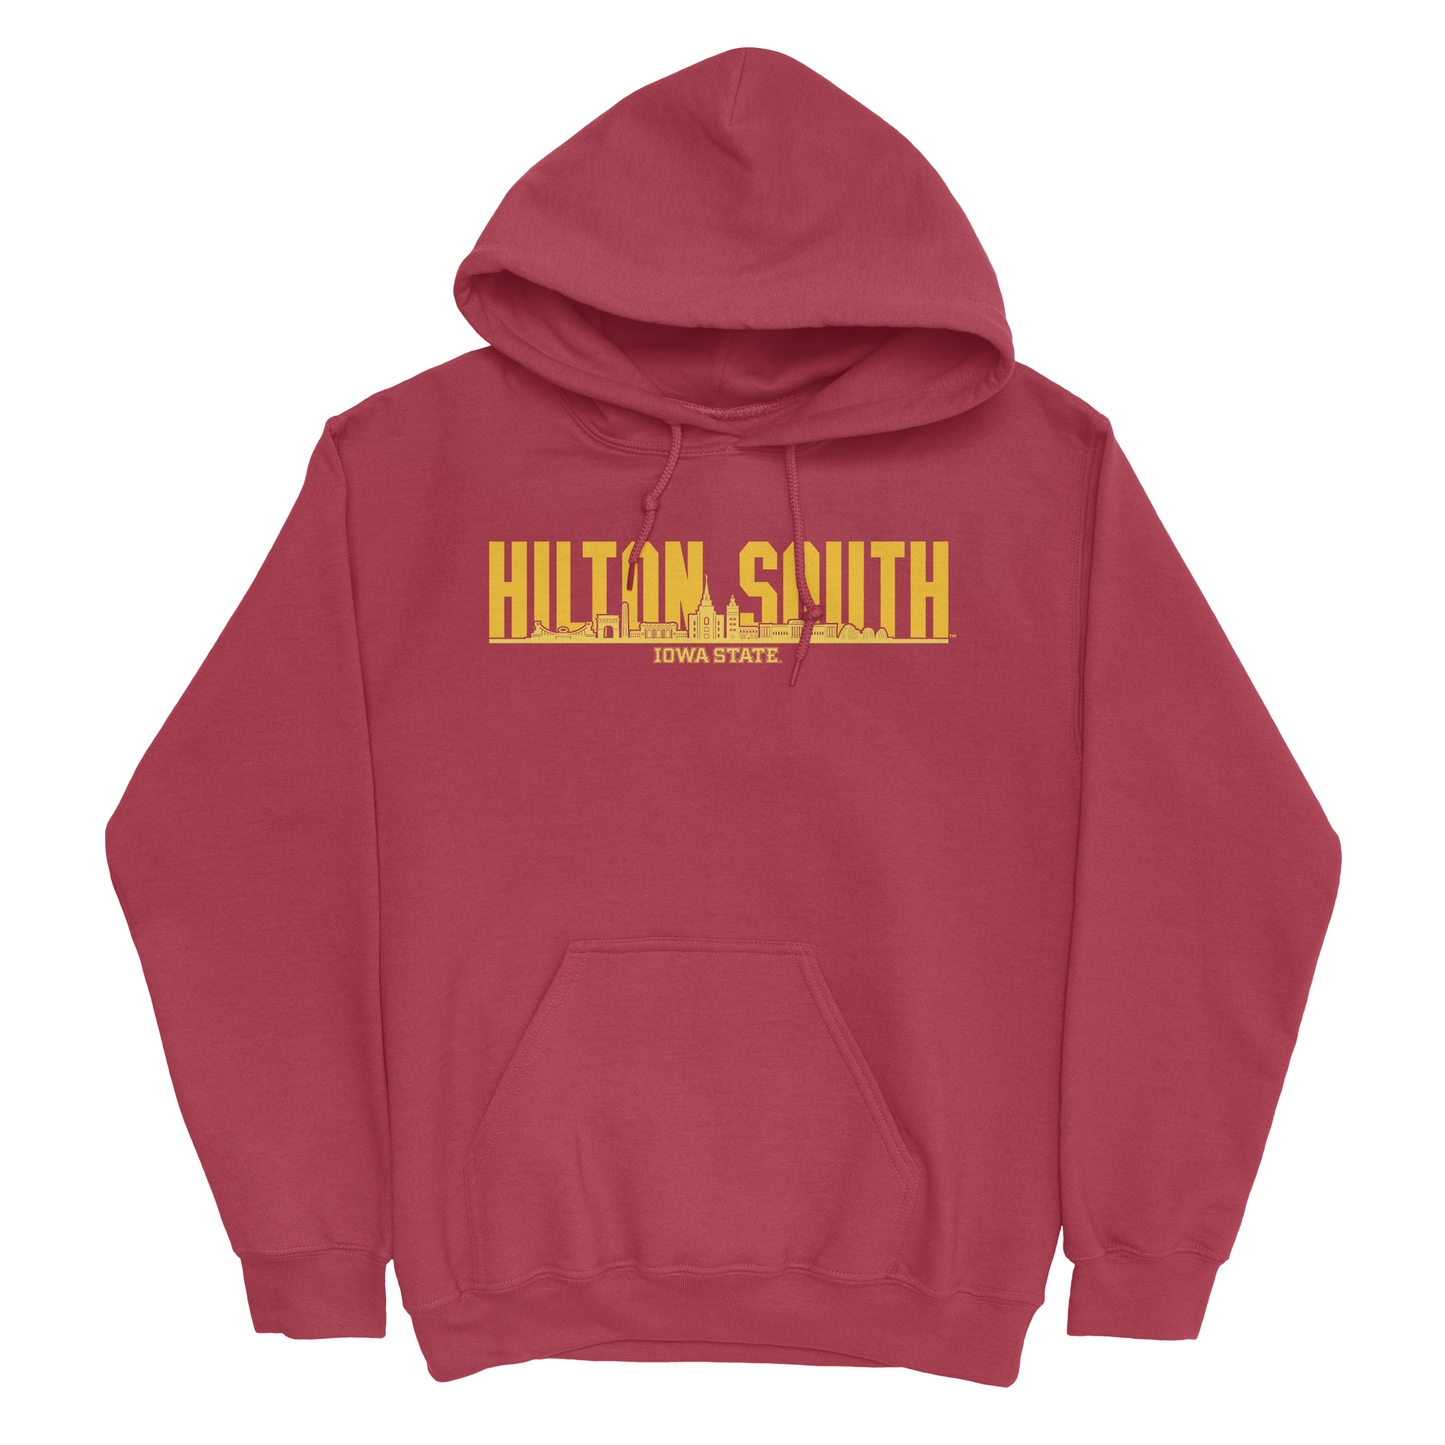 Exclusive Release - Hilton South Hoodie